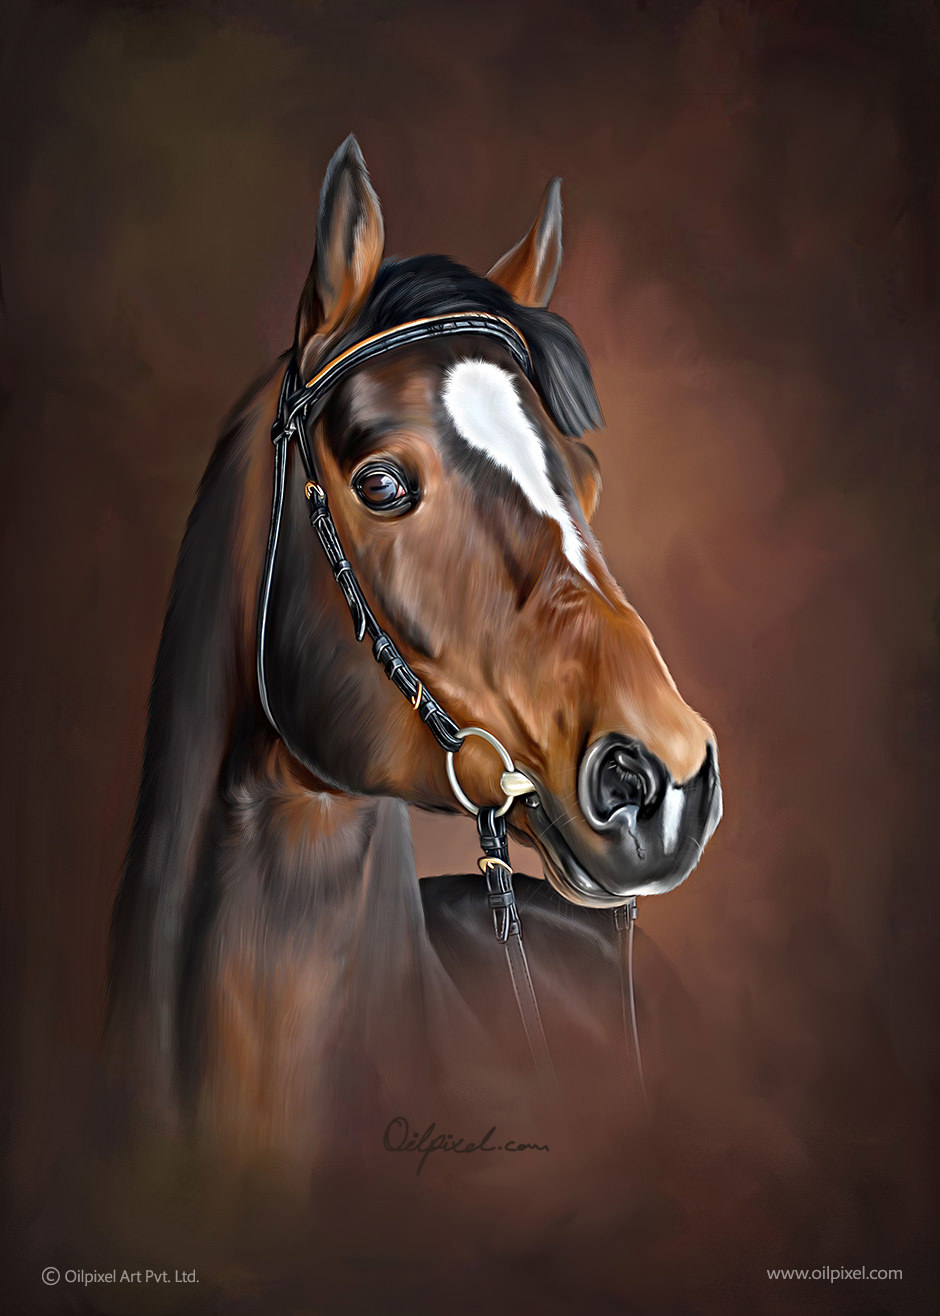 Horse Digital Portrait Painting by Oilpixel by oilpixel on